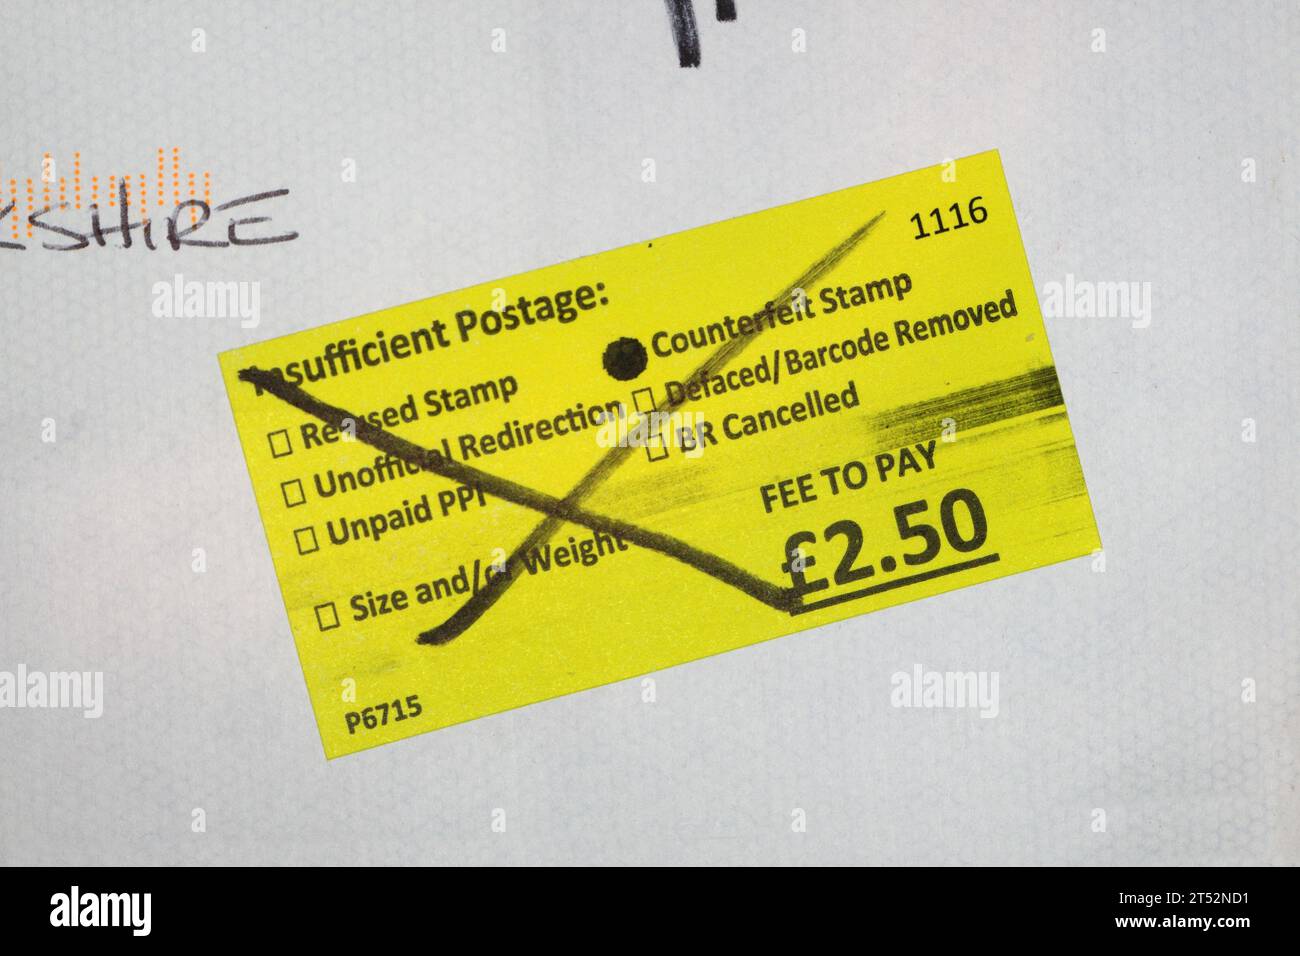 Royal Mail fee to pay sticker, counterfeit stamp insufficient postage Stock Photo